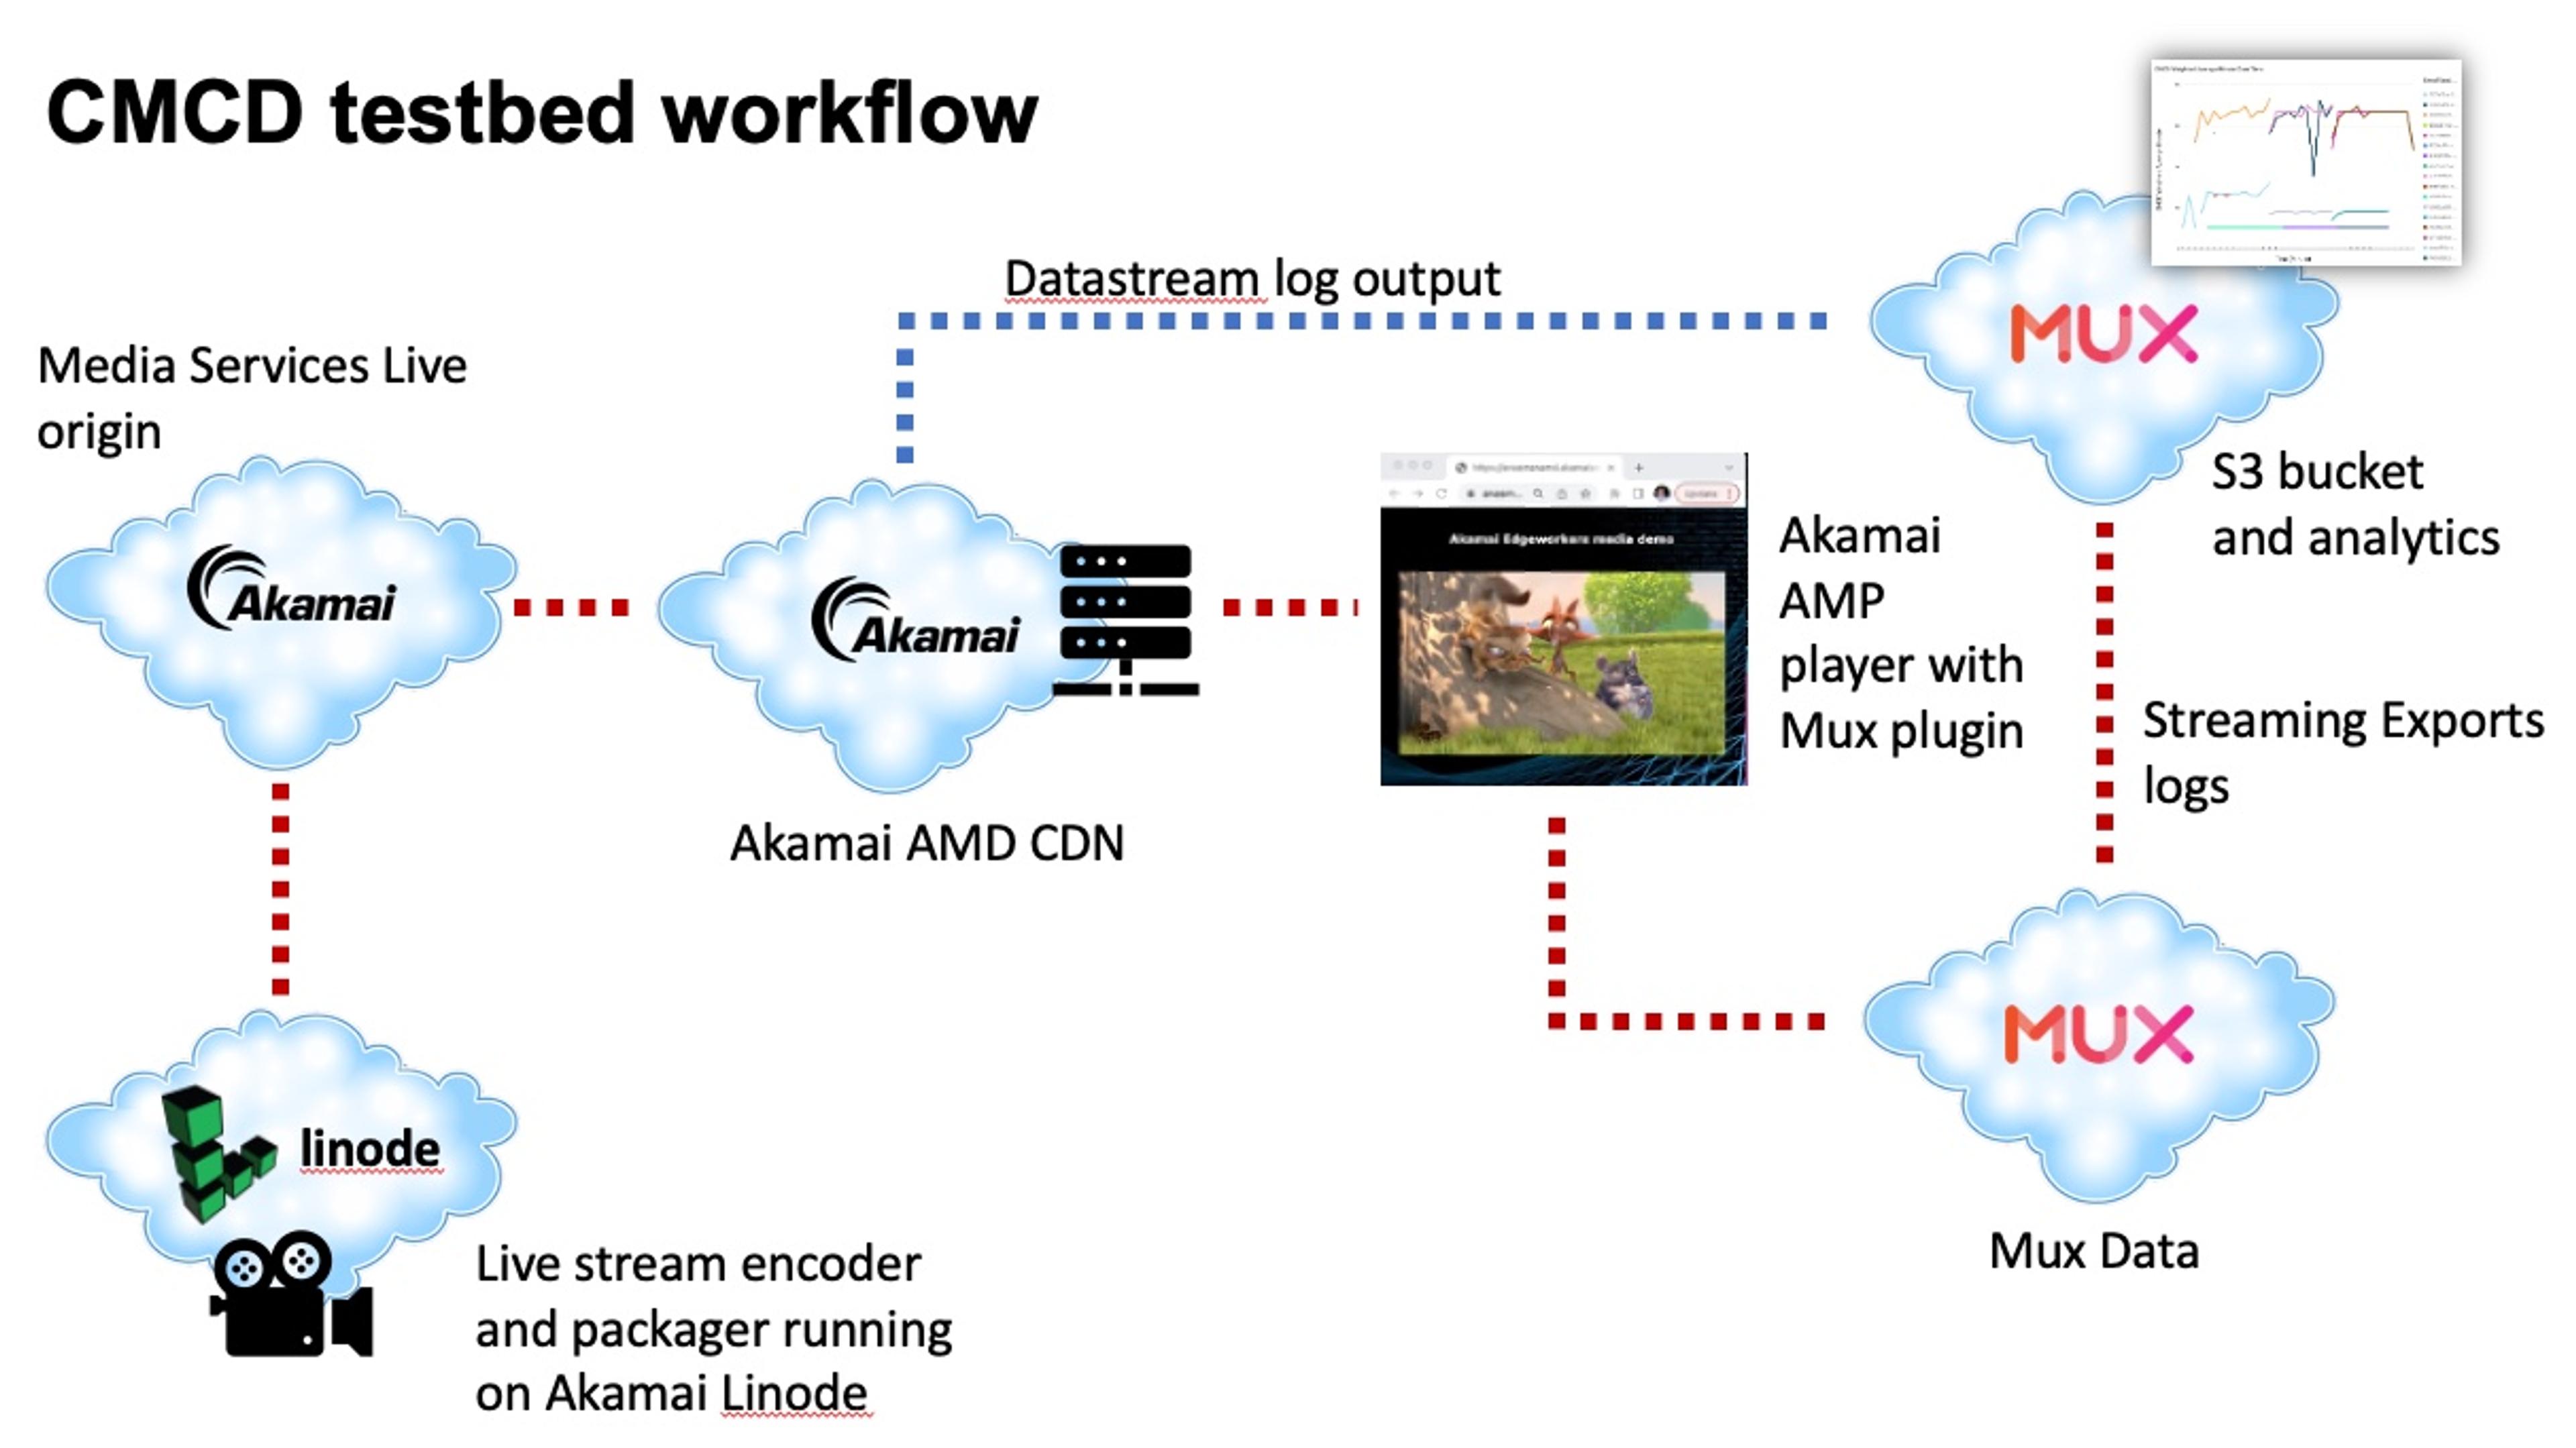 an image of the CMCS testbed workflow